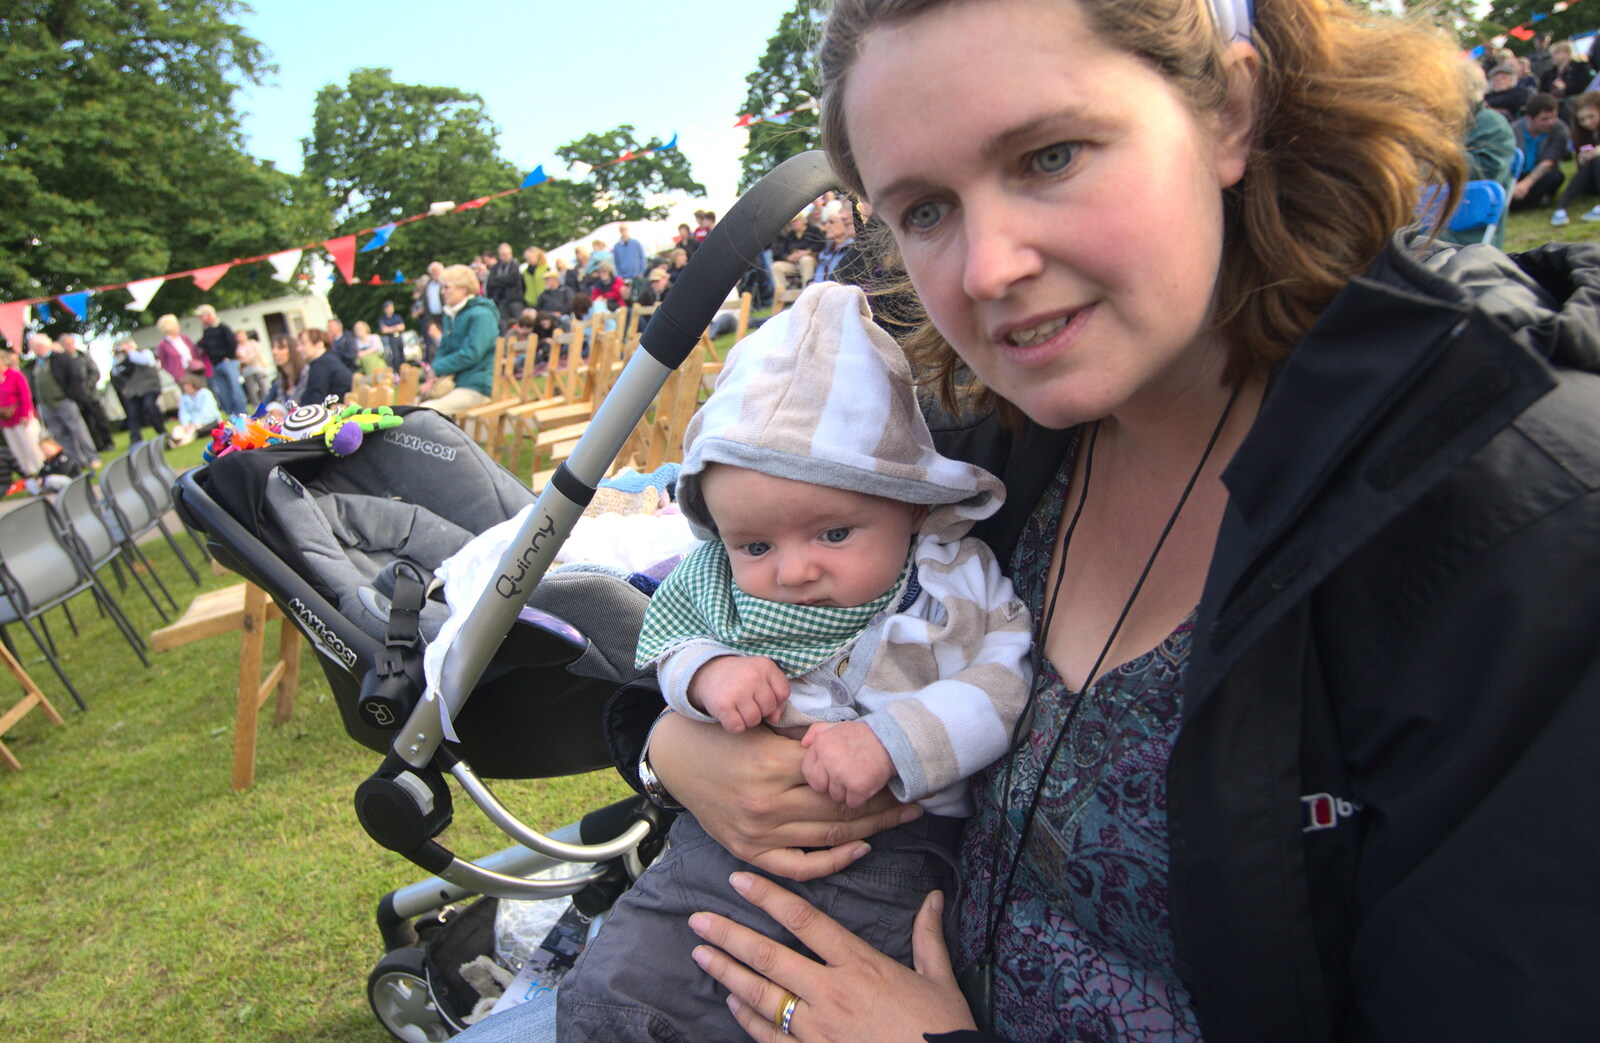 Harry and Isobel from Grandad's Gaff and Music in the Park, Diss, Norfolk - 16th June 2012